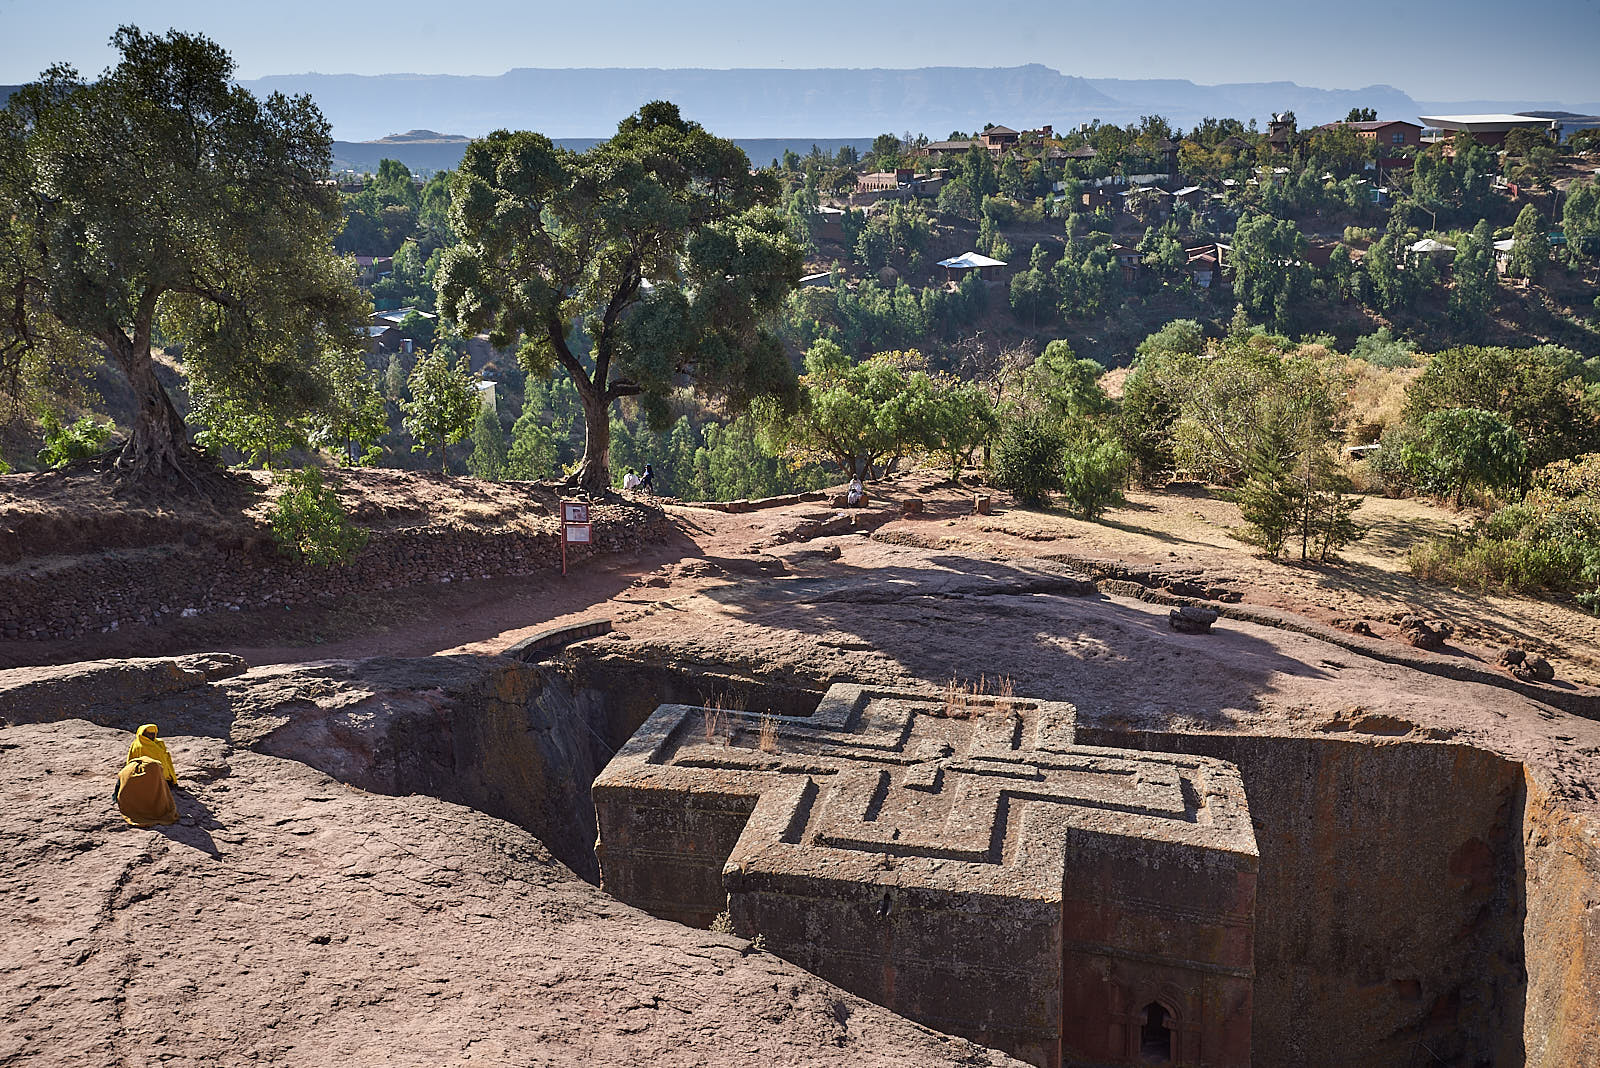  Carved out of volcanic sediment, the Church of Saint George’s crossed roof, Lalibela, Ethiopia. 